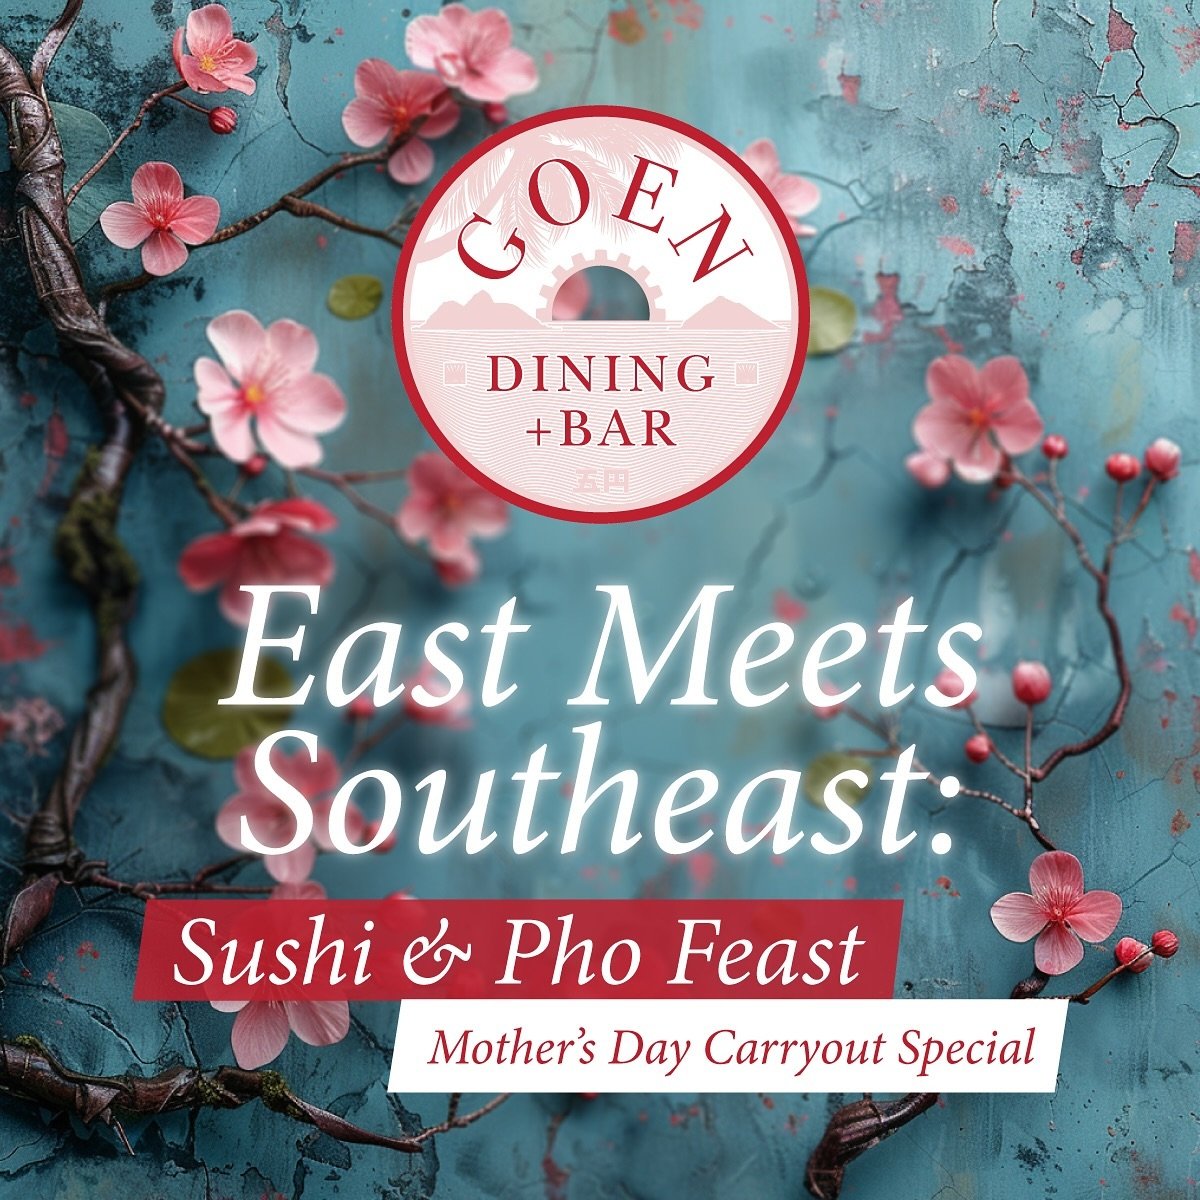 Mother&rsquo;s Day Carryout Special: East Meets Southeast: Sushi &amp; Pho Feast. Indulge in an exquisite fusion of flavors with our Mother&rsquo;s Day special at GOEN Dining+Bar. Our unique offering combines the delicate tastes of stuffed inari sush